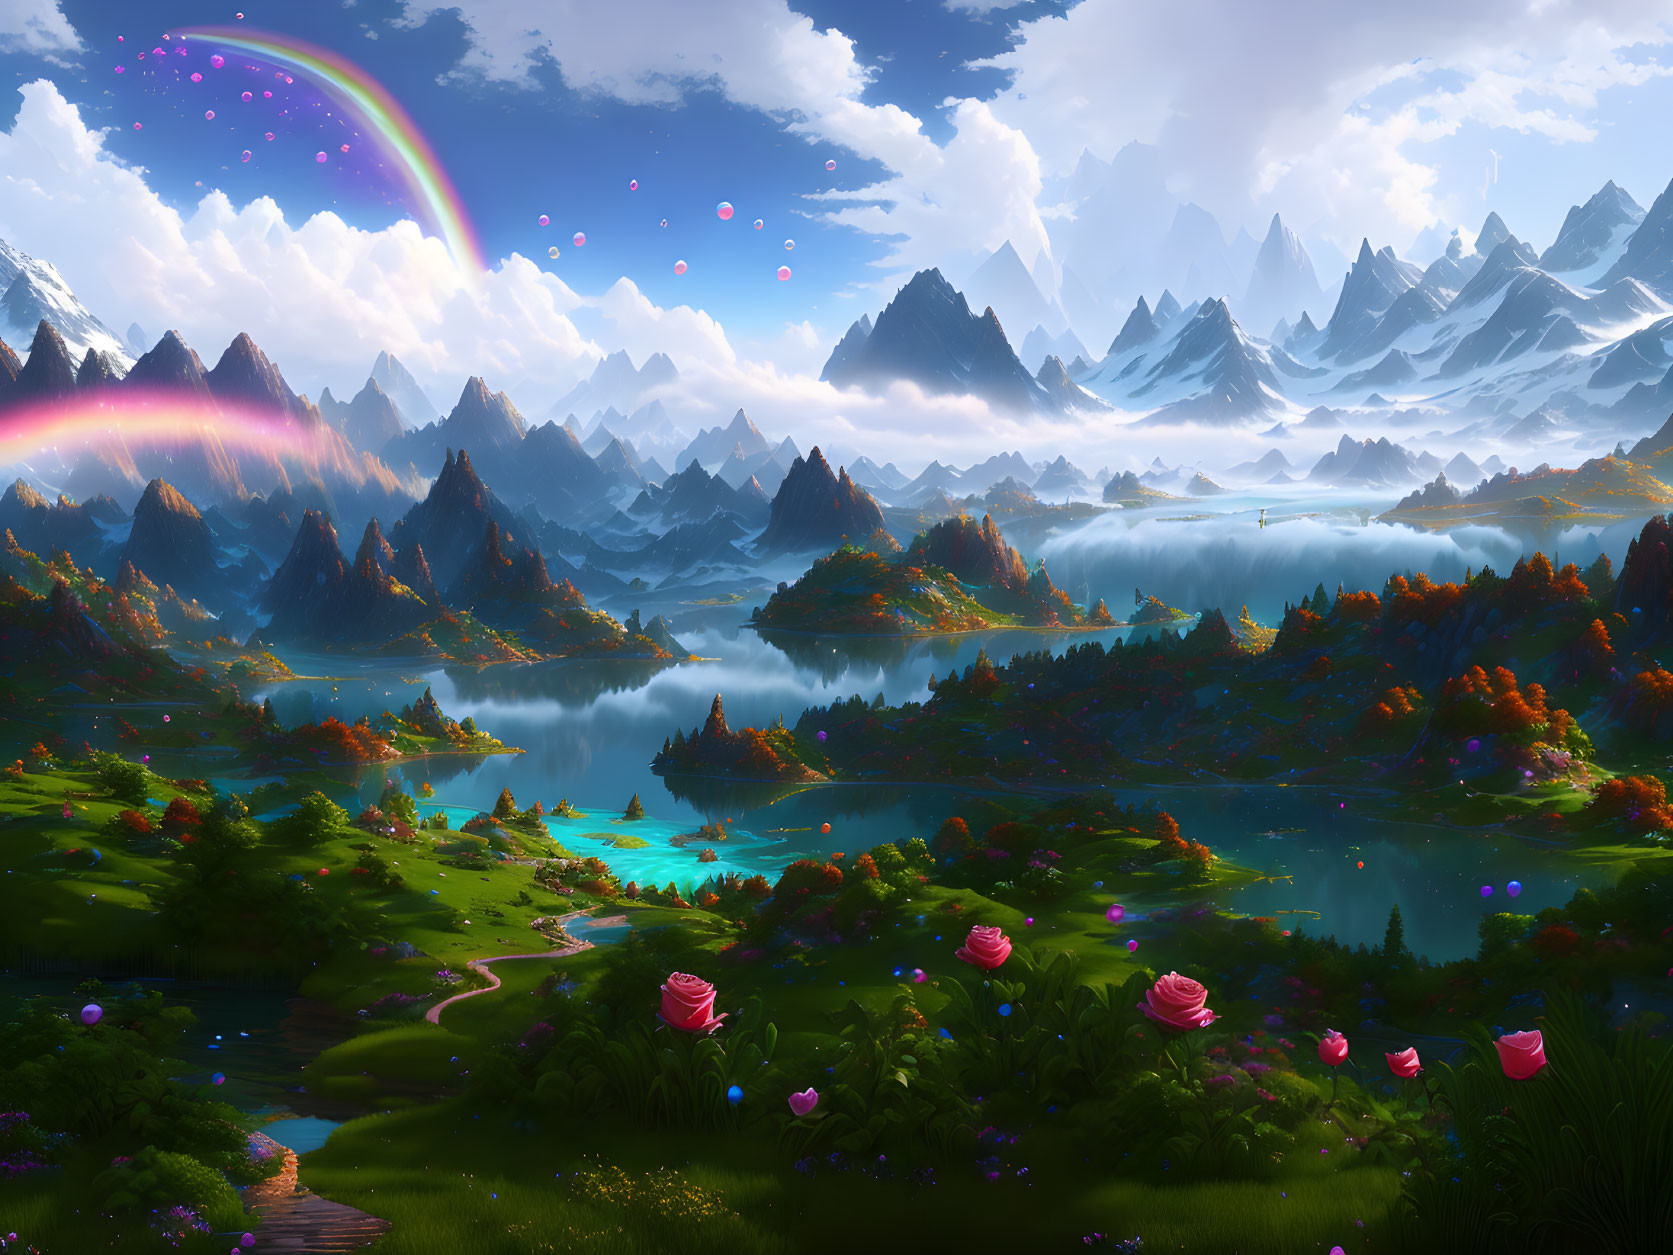 Colorful fantasy landscape with mountains, rainbow, lakes, forests, and oversized roses